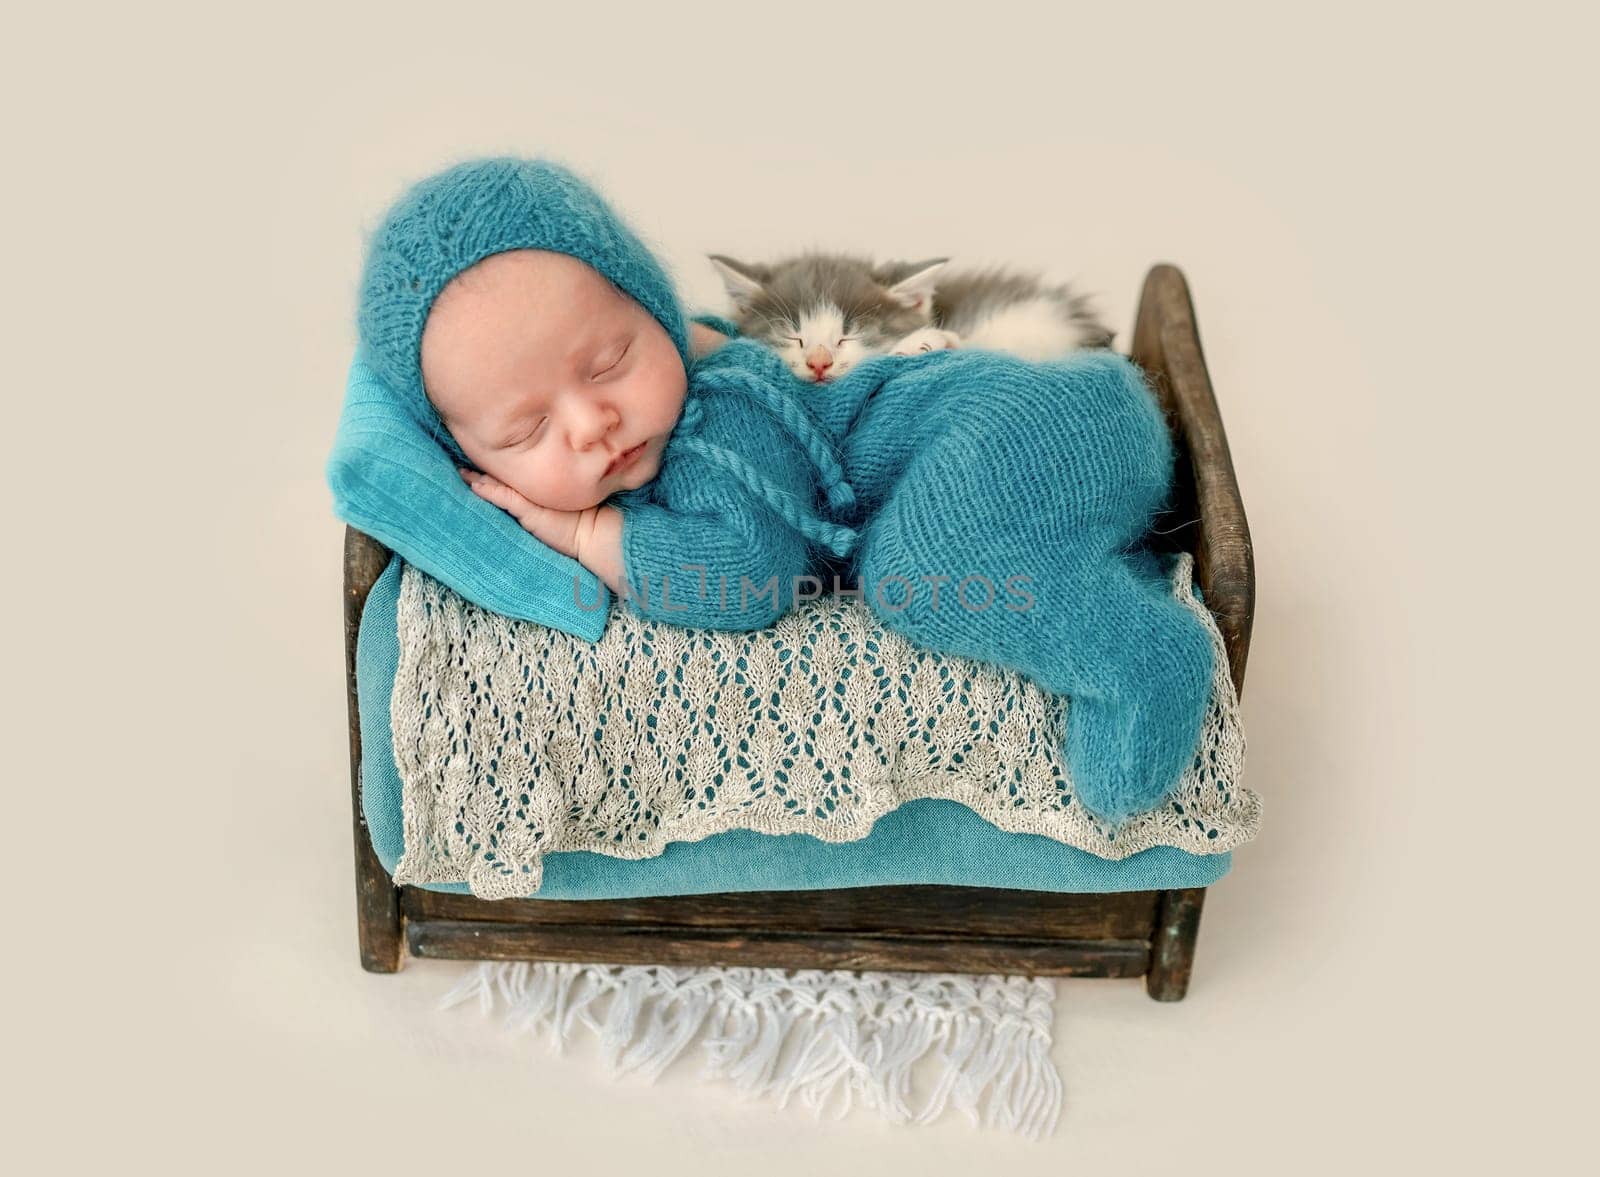 Newborn baby boy with kitty sleeping and holding hands under his cheeks. Infant kid napping in tiny bed